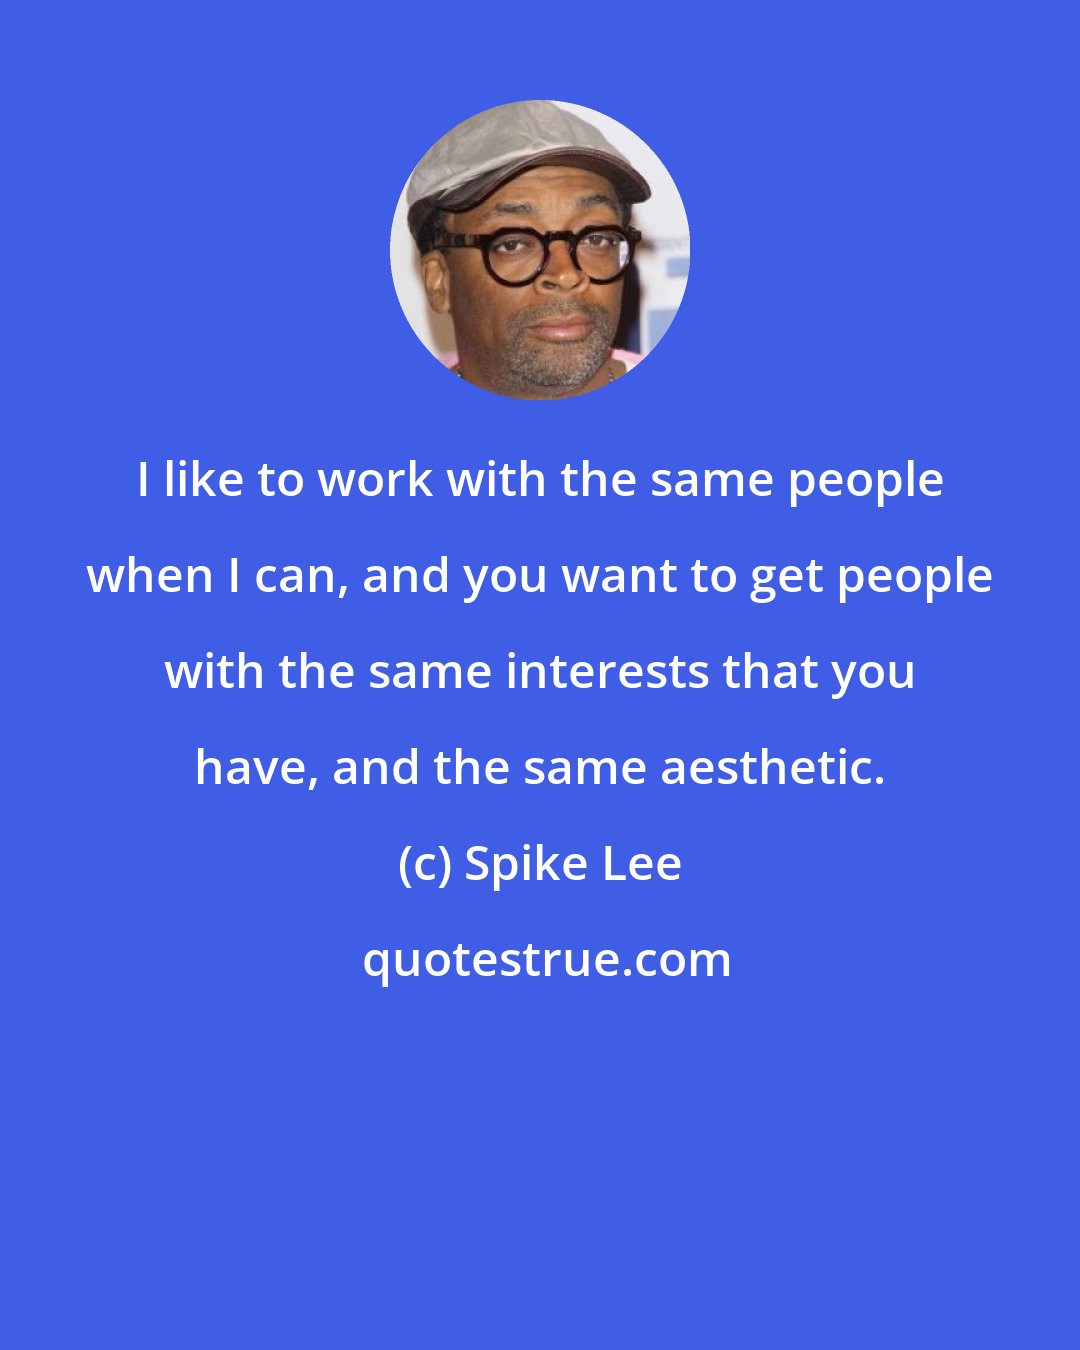 Spike Lee: I like to work with the same people when I can, and you want to get people with the same interests that you have, and the same aesthetic.